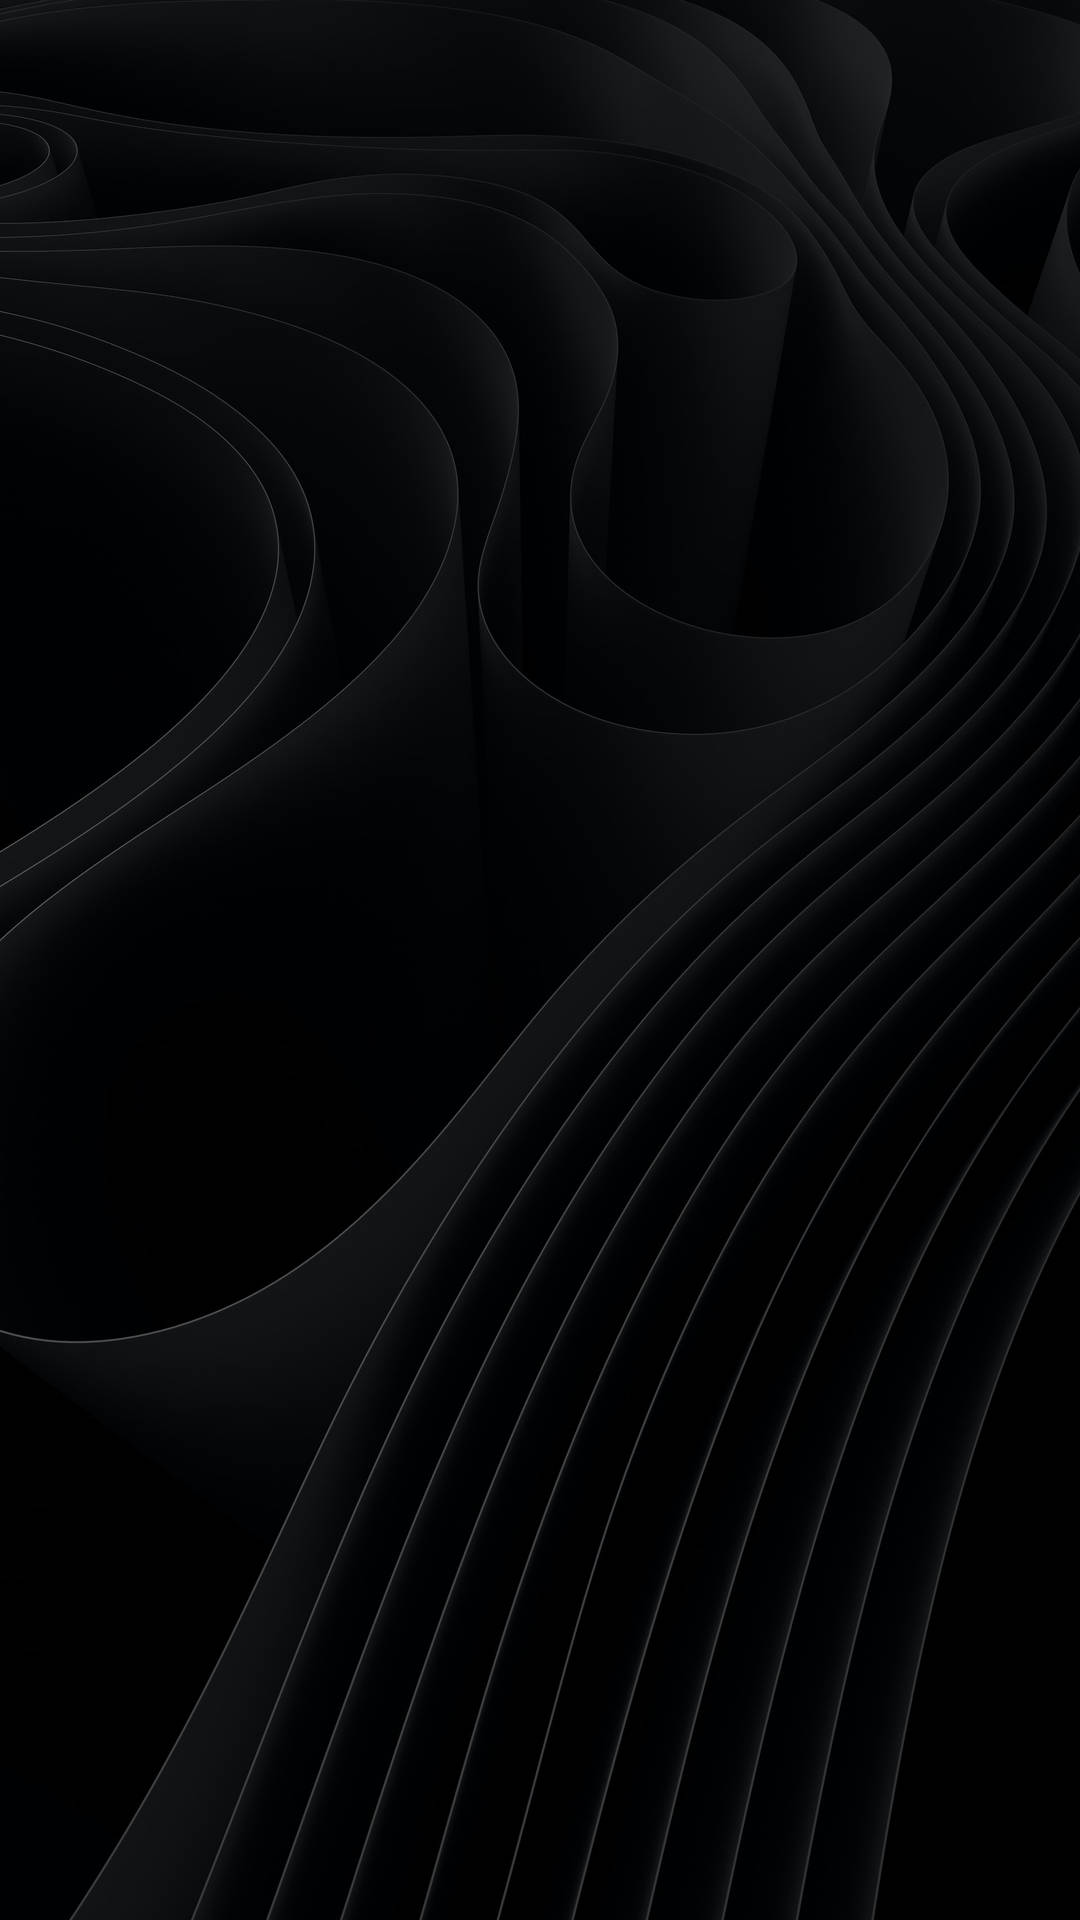 Artistic Paper Quilling Black Aesthetic For An Iphone Tumblr Wallpaper Background